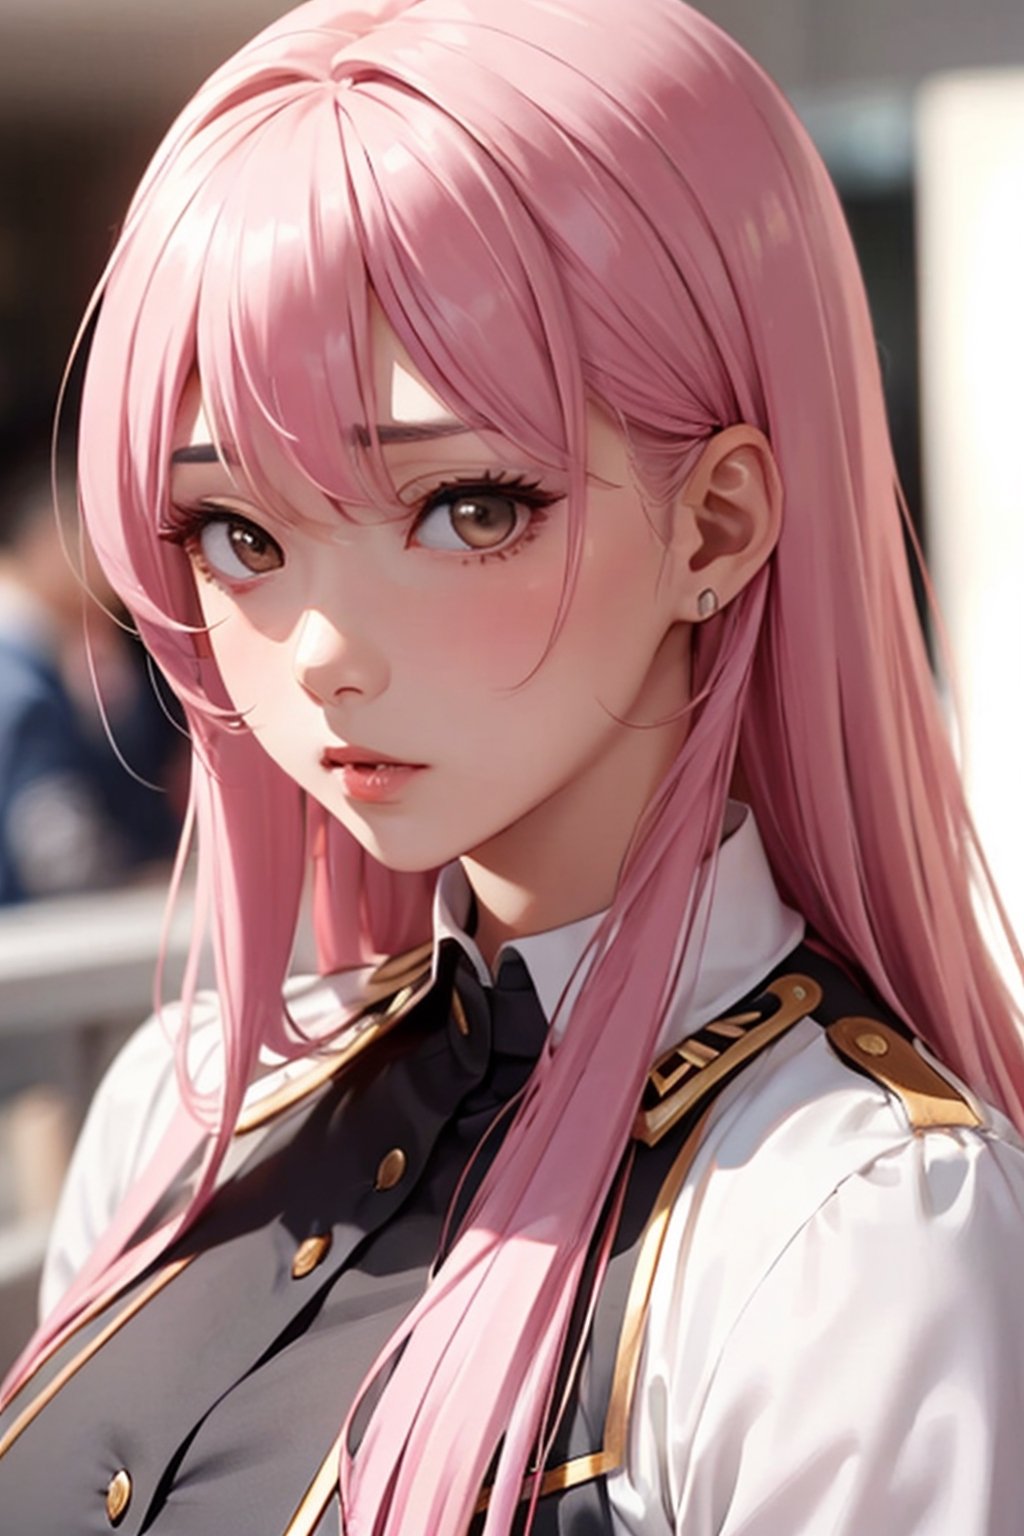 Long pink hair and a confused facial expression
A cute and lovely woman in her 20s wearing an idol uniform.